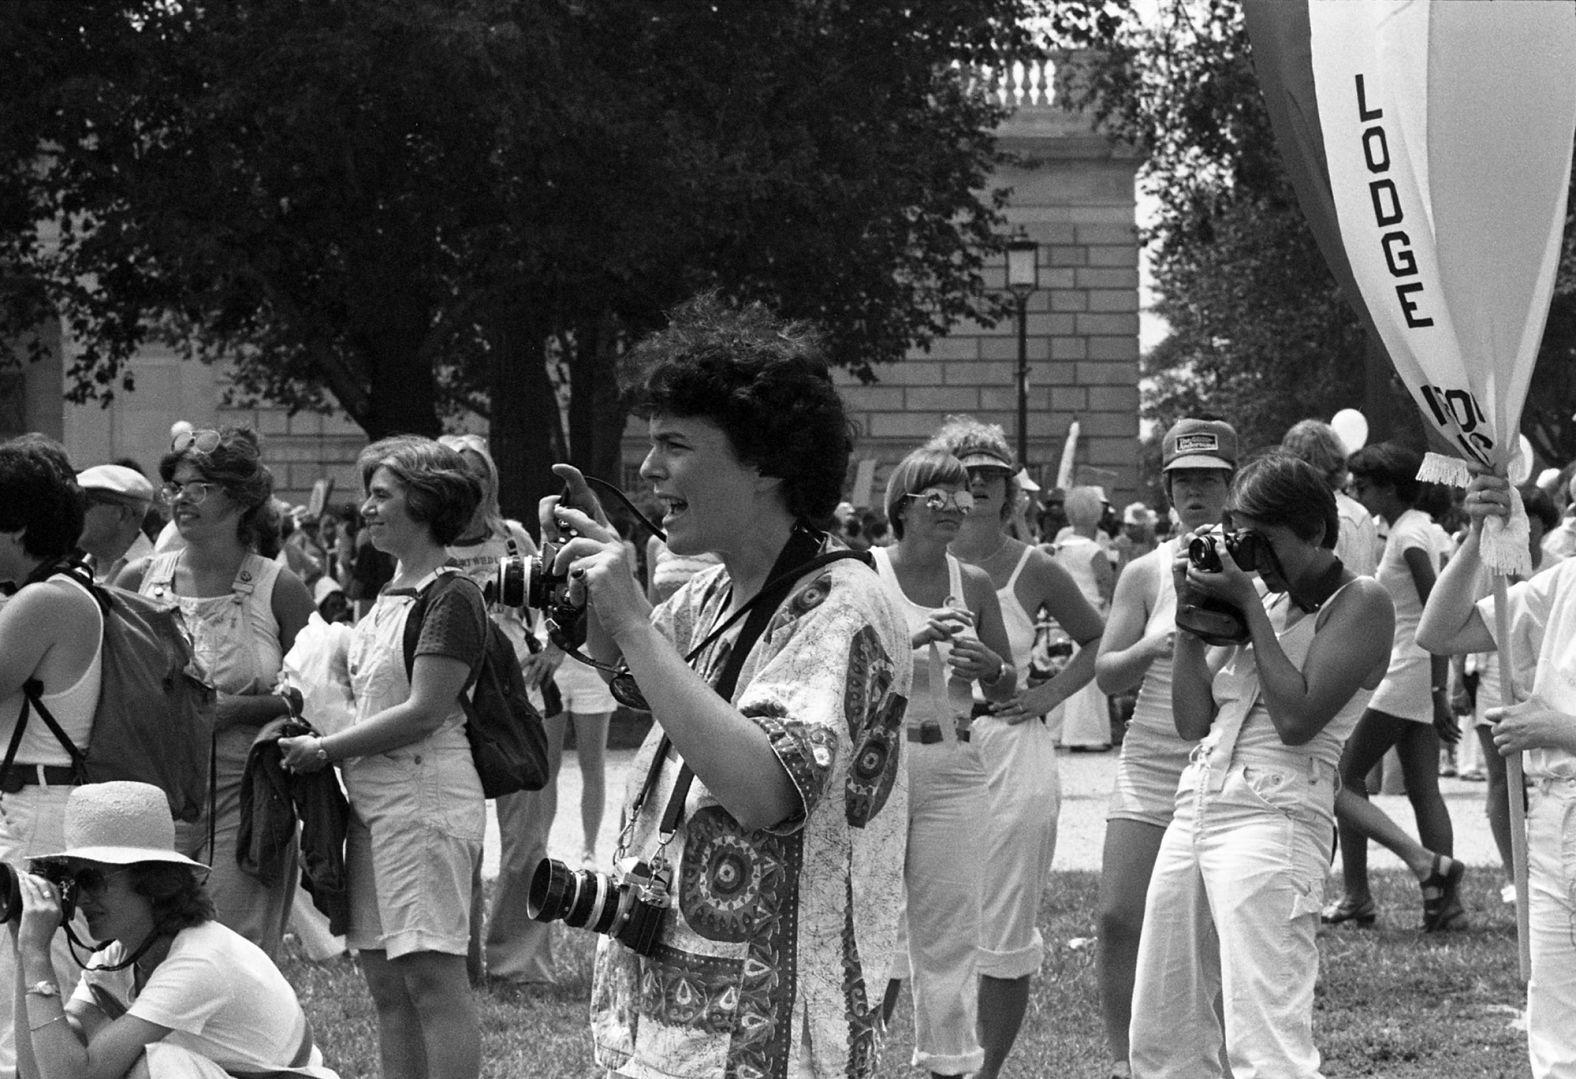 Joan E. Biren is seen in the foreground as she photographs the Equal Rights Amendment March in Washington in 1978. Biren, aka JEB, has been documenting the LGBTQ community for decades. "I started photographing at a time when it was almost impossible to find authentic images of lesbians," <a href="index.php?page=&url=https%3A%2F%2Fwww.nytimes.com%2F2019%2F04%2F08%2Flens%2Flesbian-lives-movement-jeb.html" target="_blank" target="_blank">she told The New York Times</a>. "I wanted my photographs to be seen. I believed they could help build a movement for our liberation."